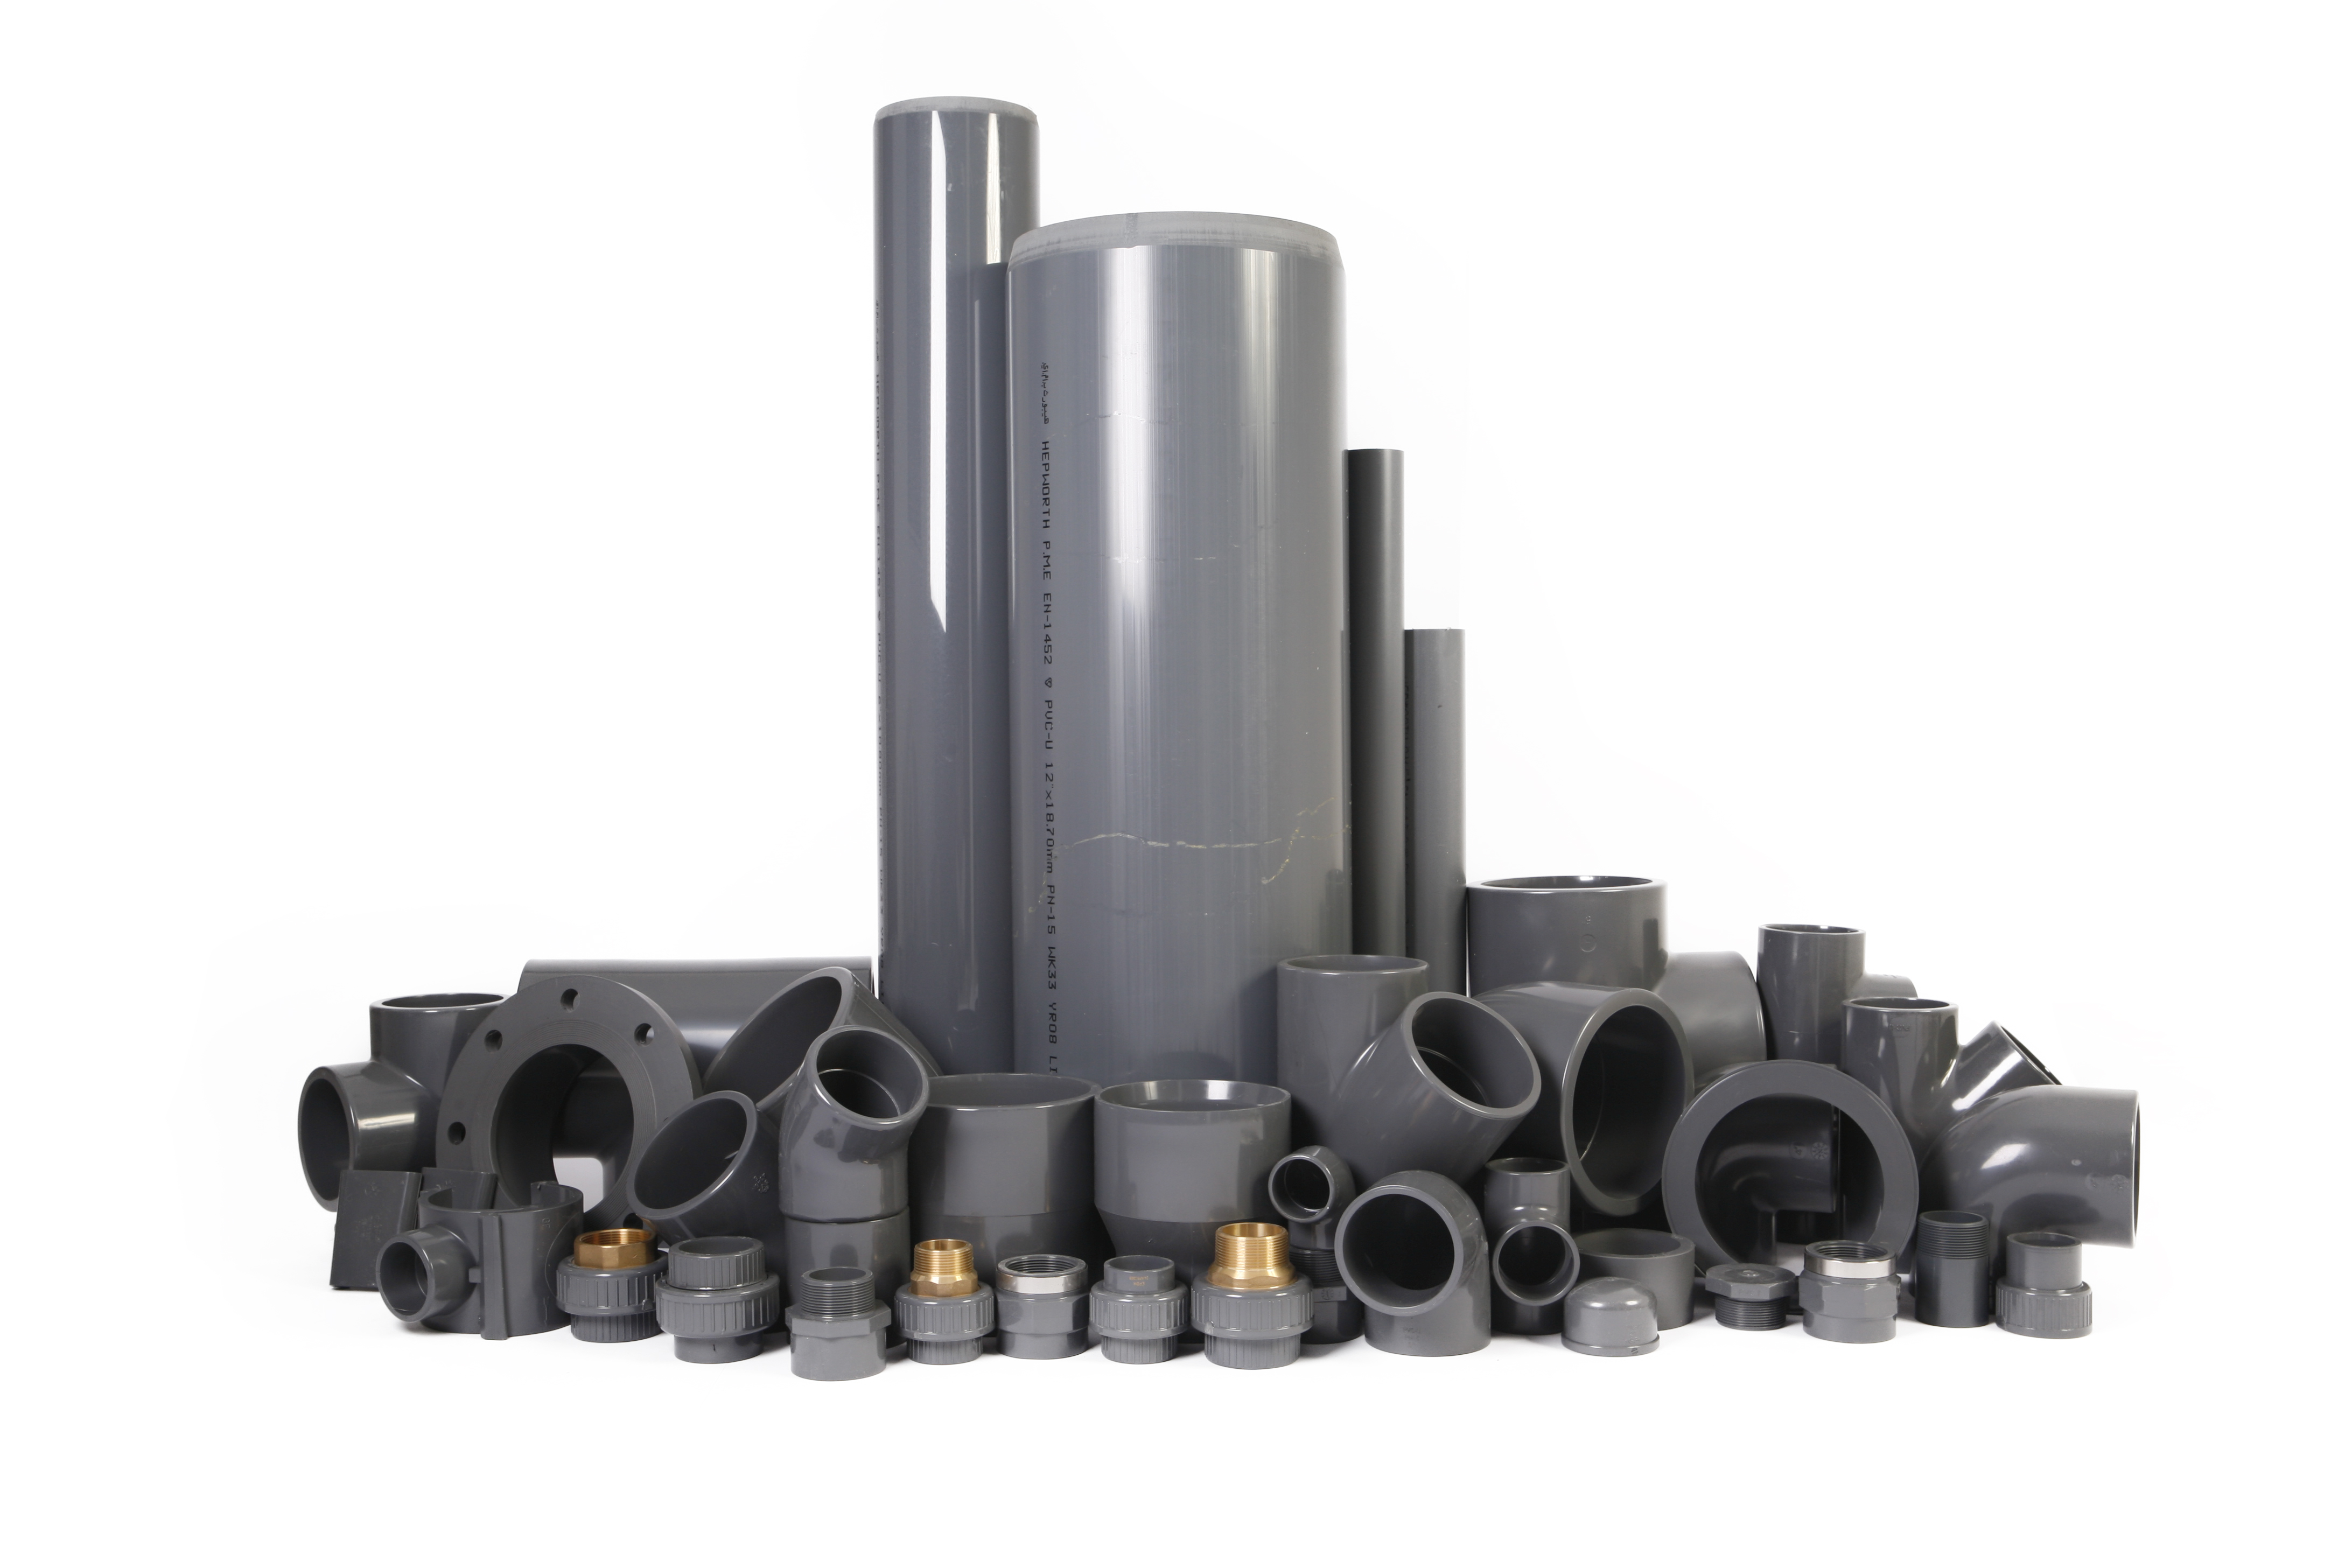 Upvc pressure pipes & fitting systems